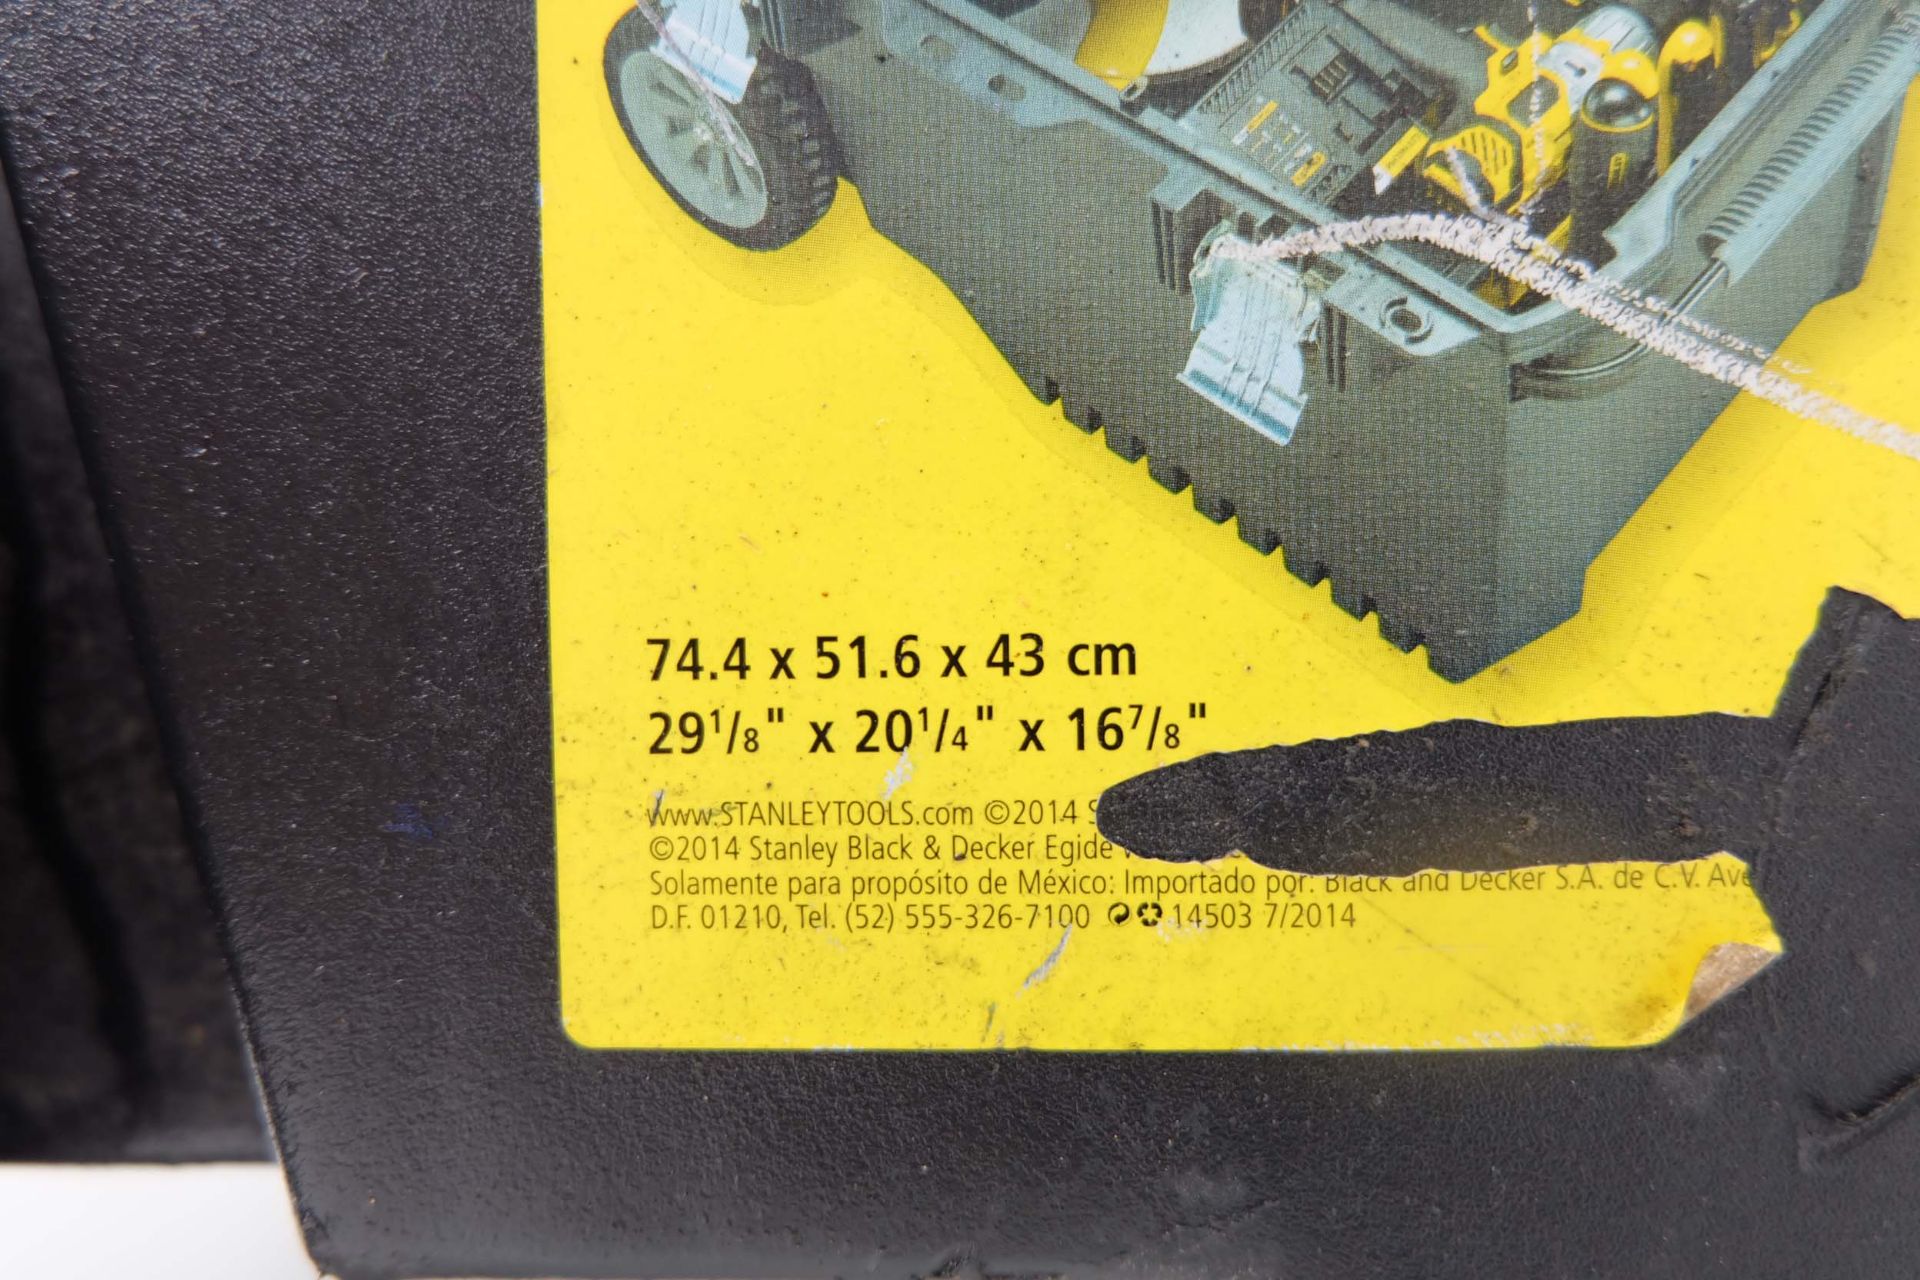 Stanley Fatmax Mobile Tool Box. Size 29" x 20" x 16". - Image 6 of 6